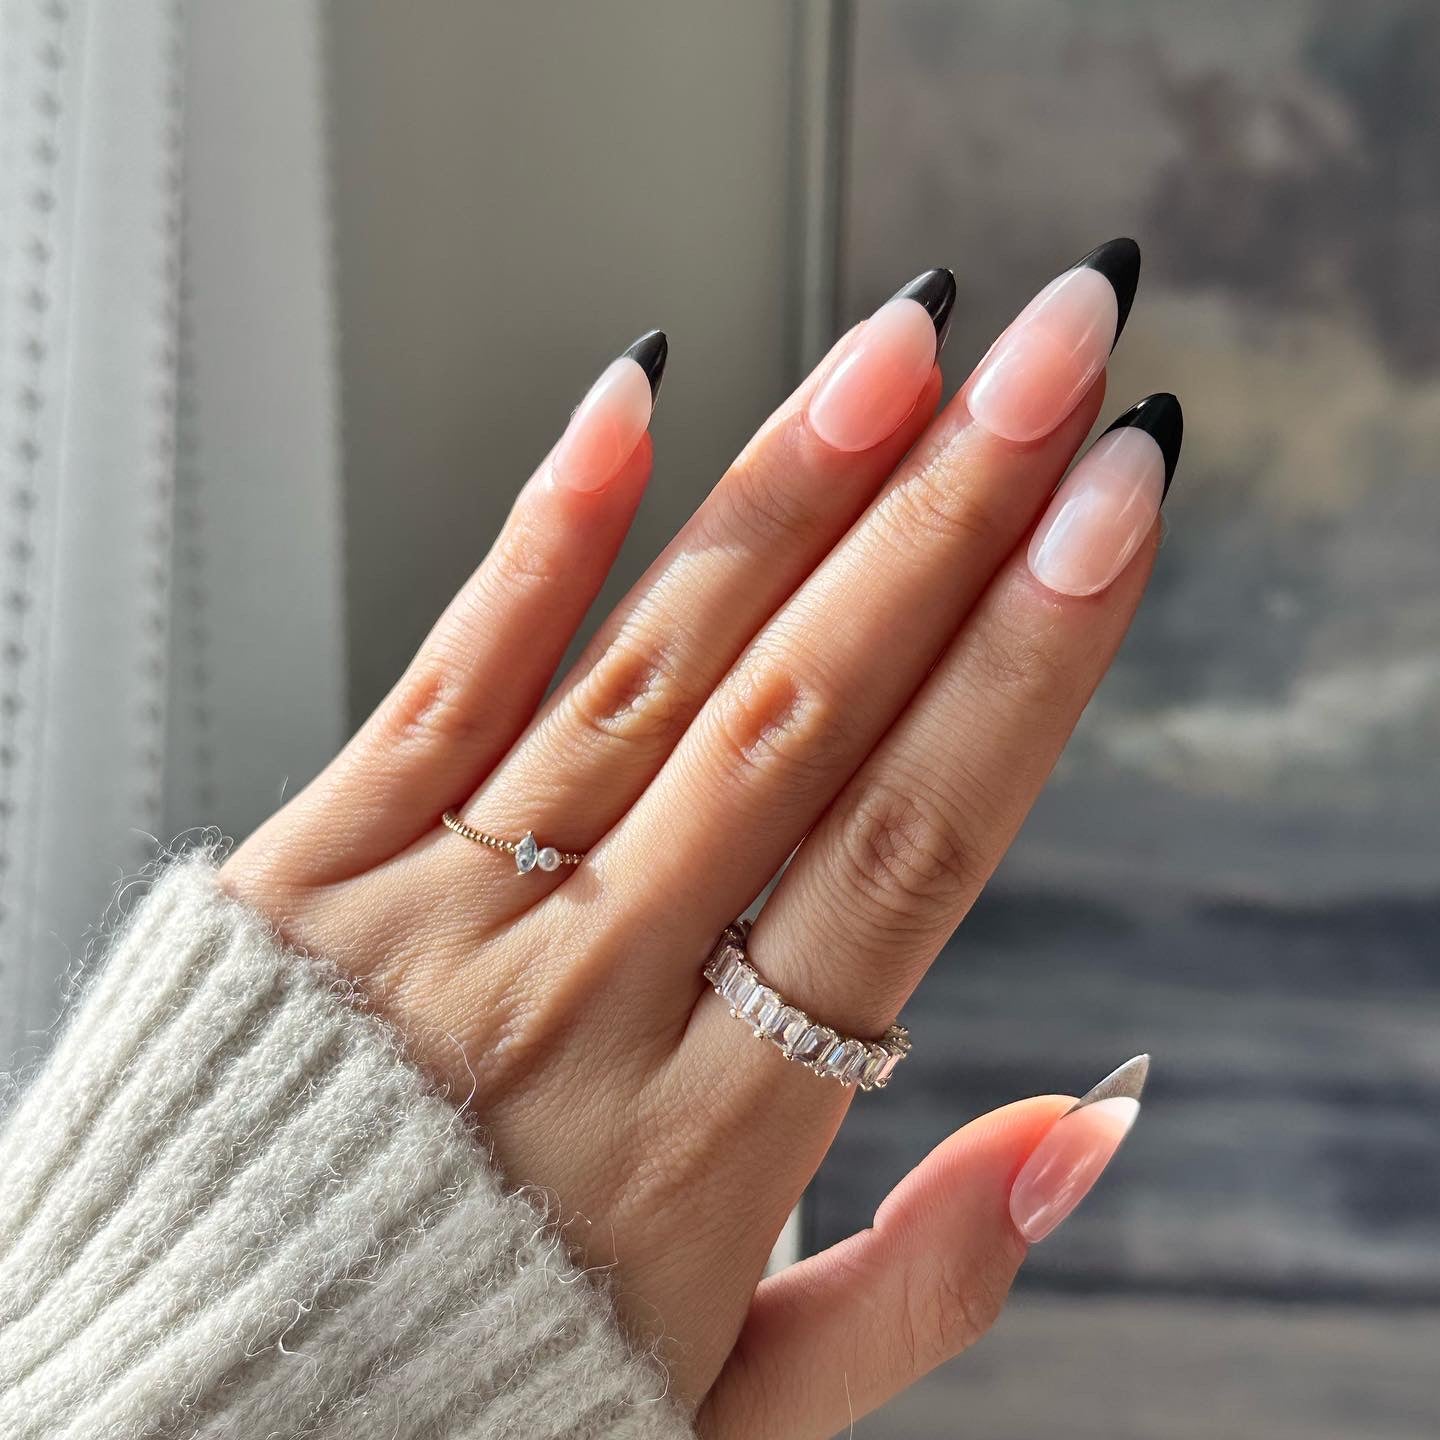 Black French tip nails